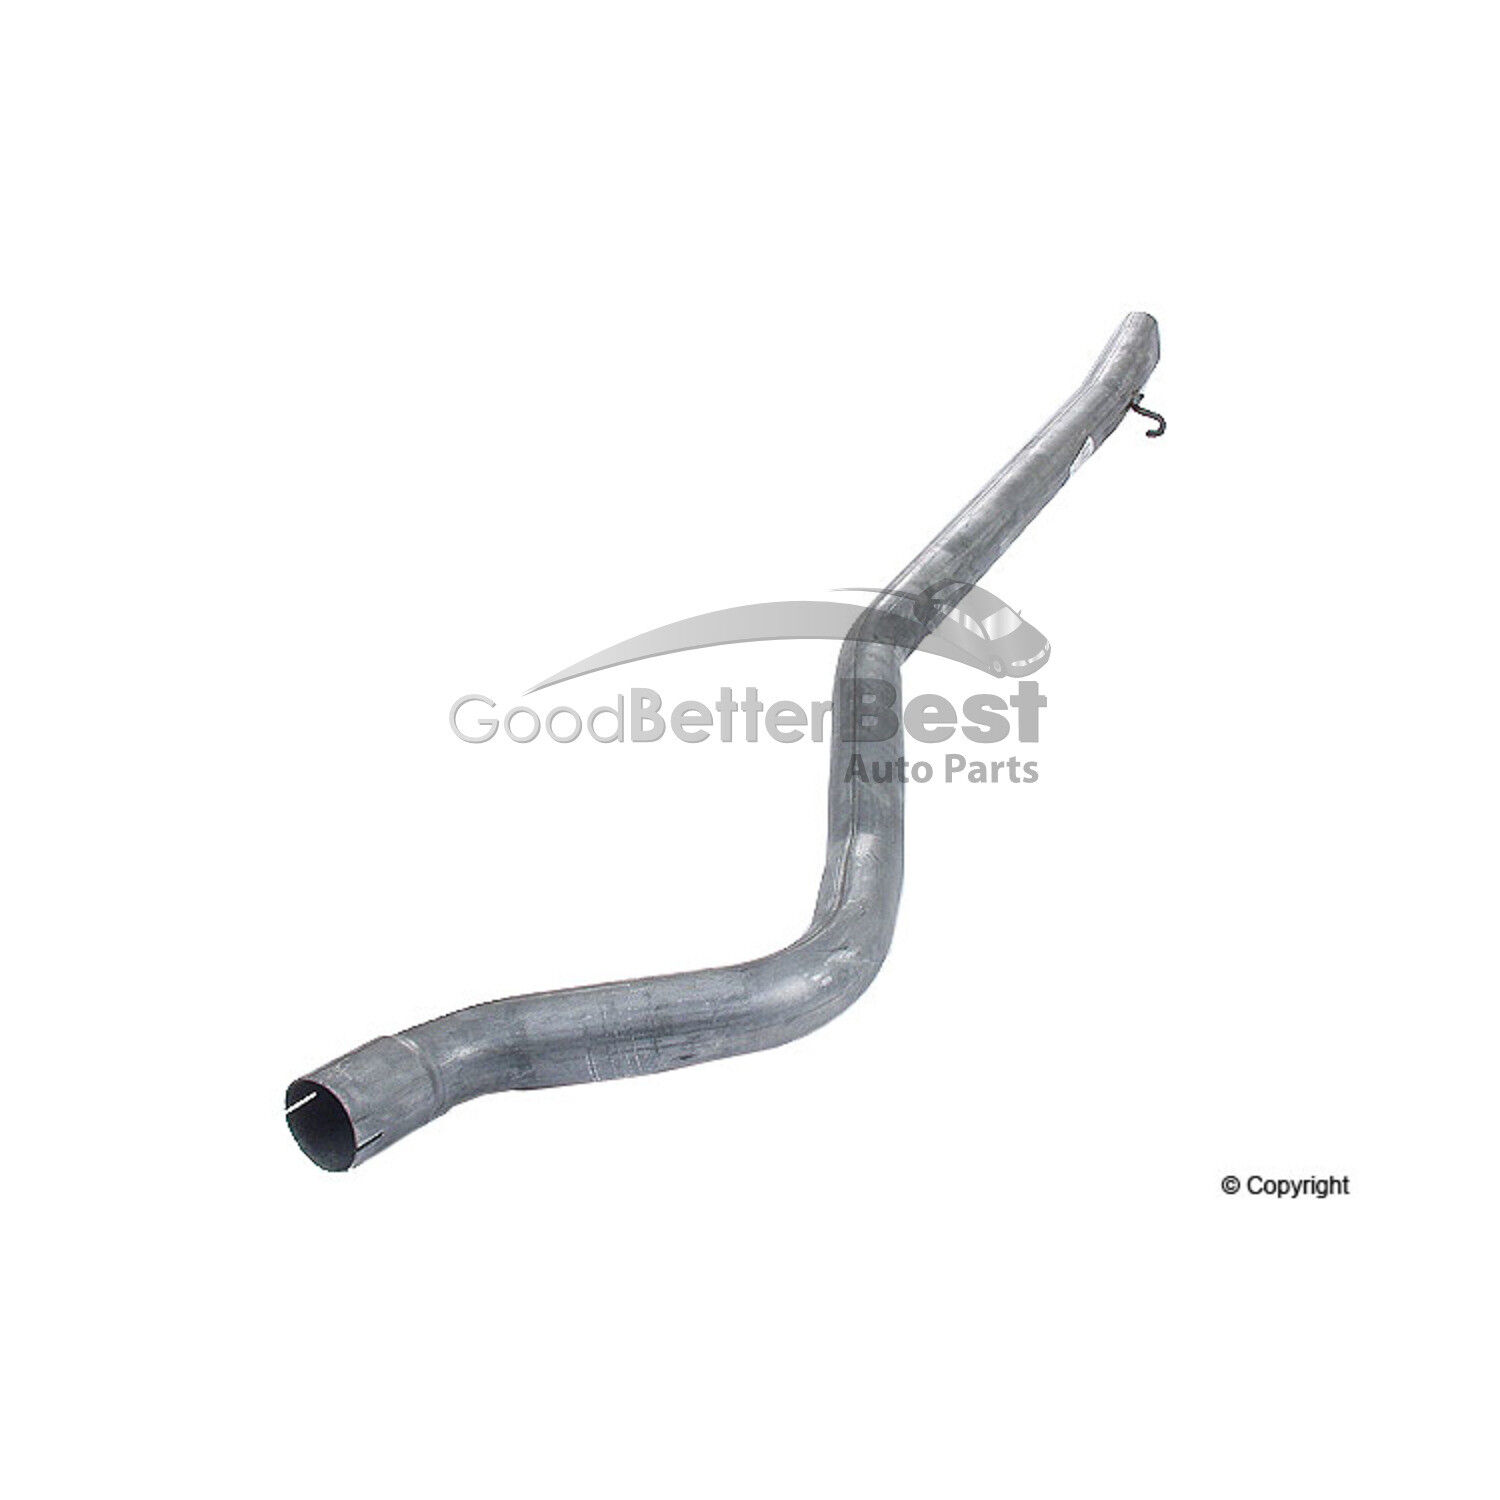 One New Starla Exhaust Tail Pipe 12771 7535925 for Saab 900